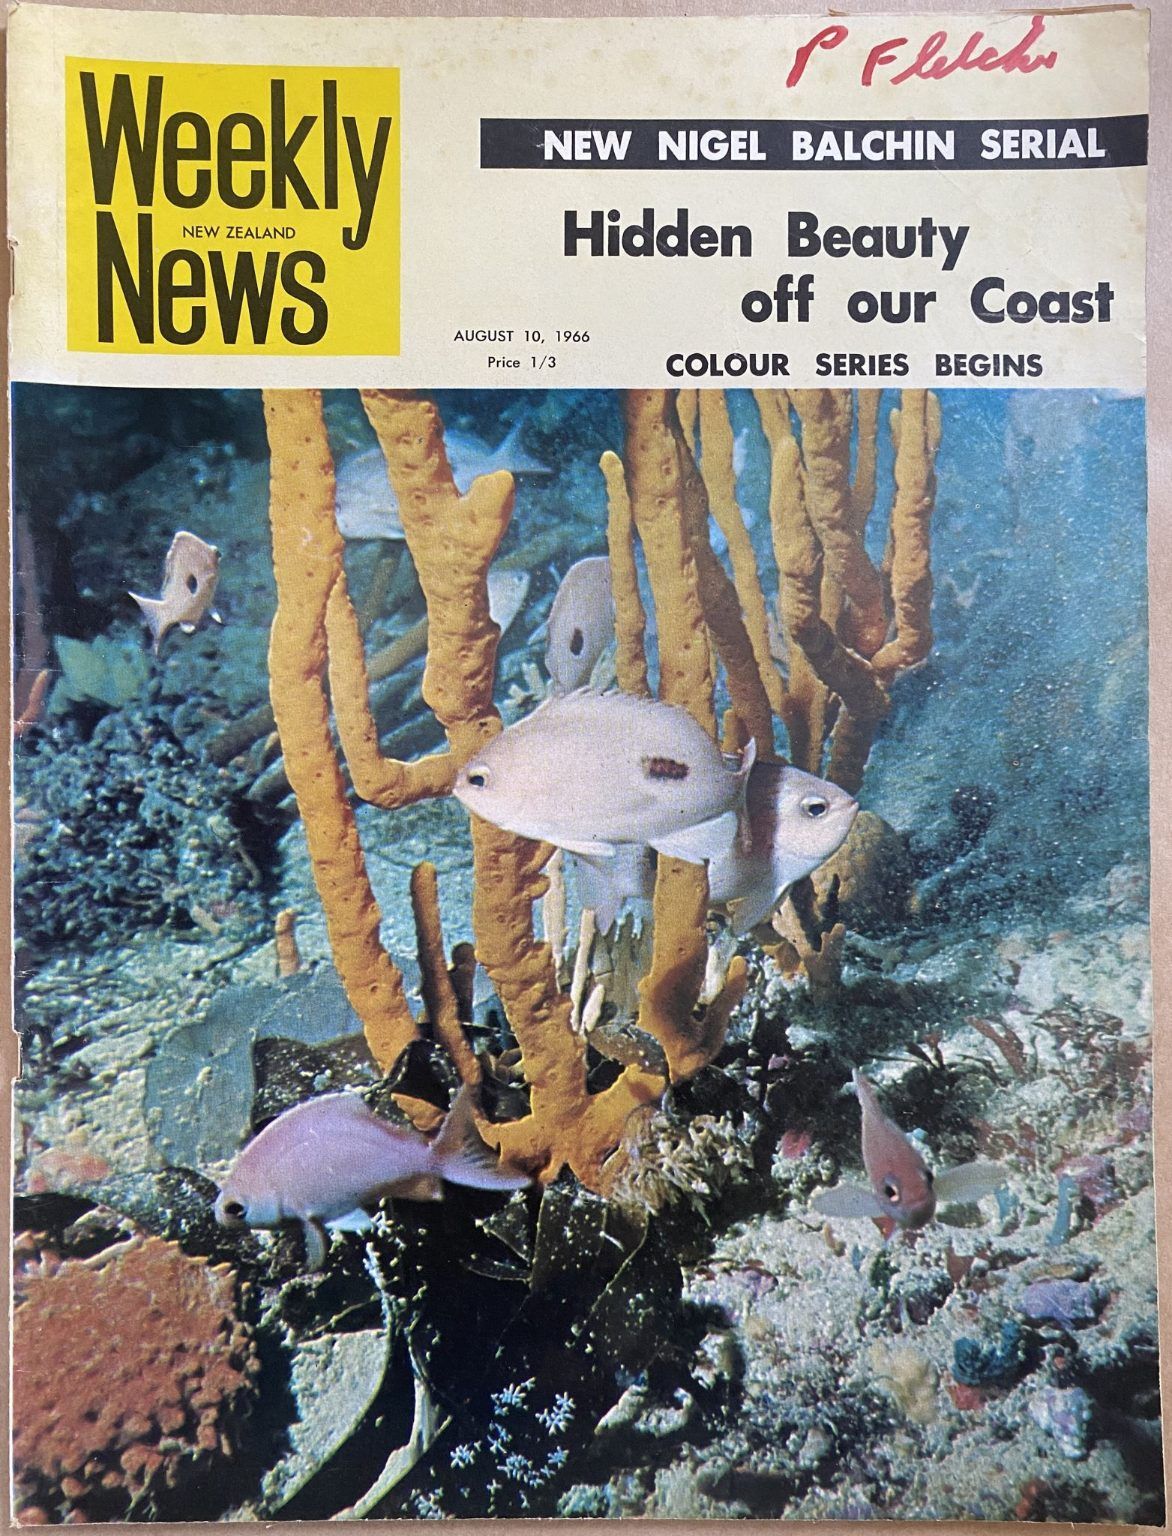 OLD NEWSPAPER: New Zealand Weekly News - No. 5359, 10 August 1966